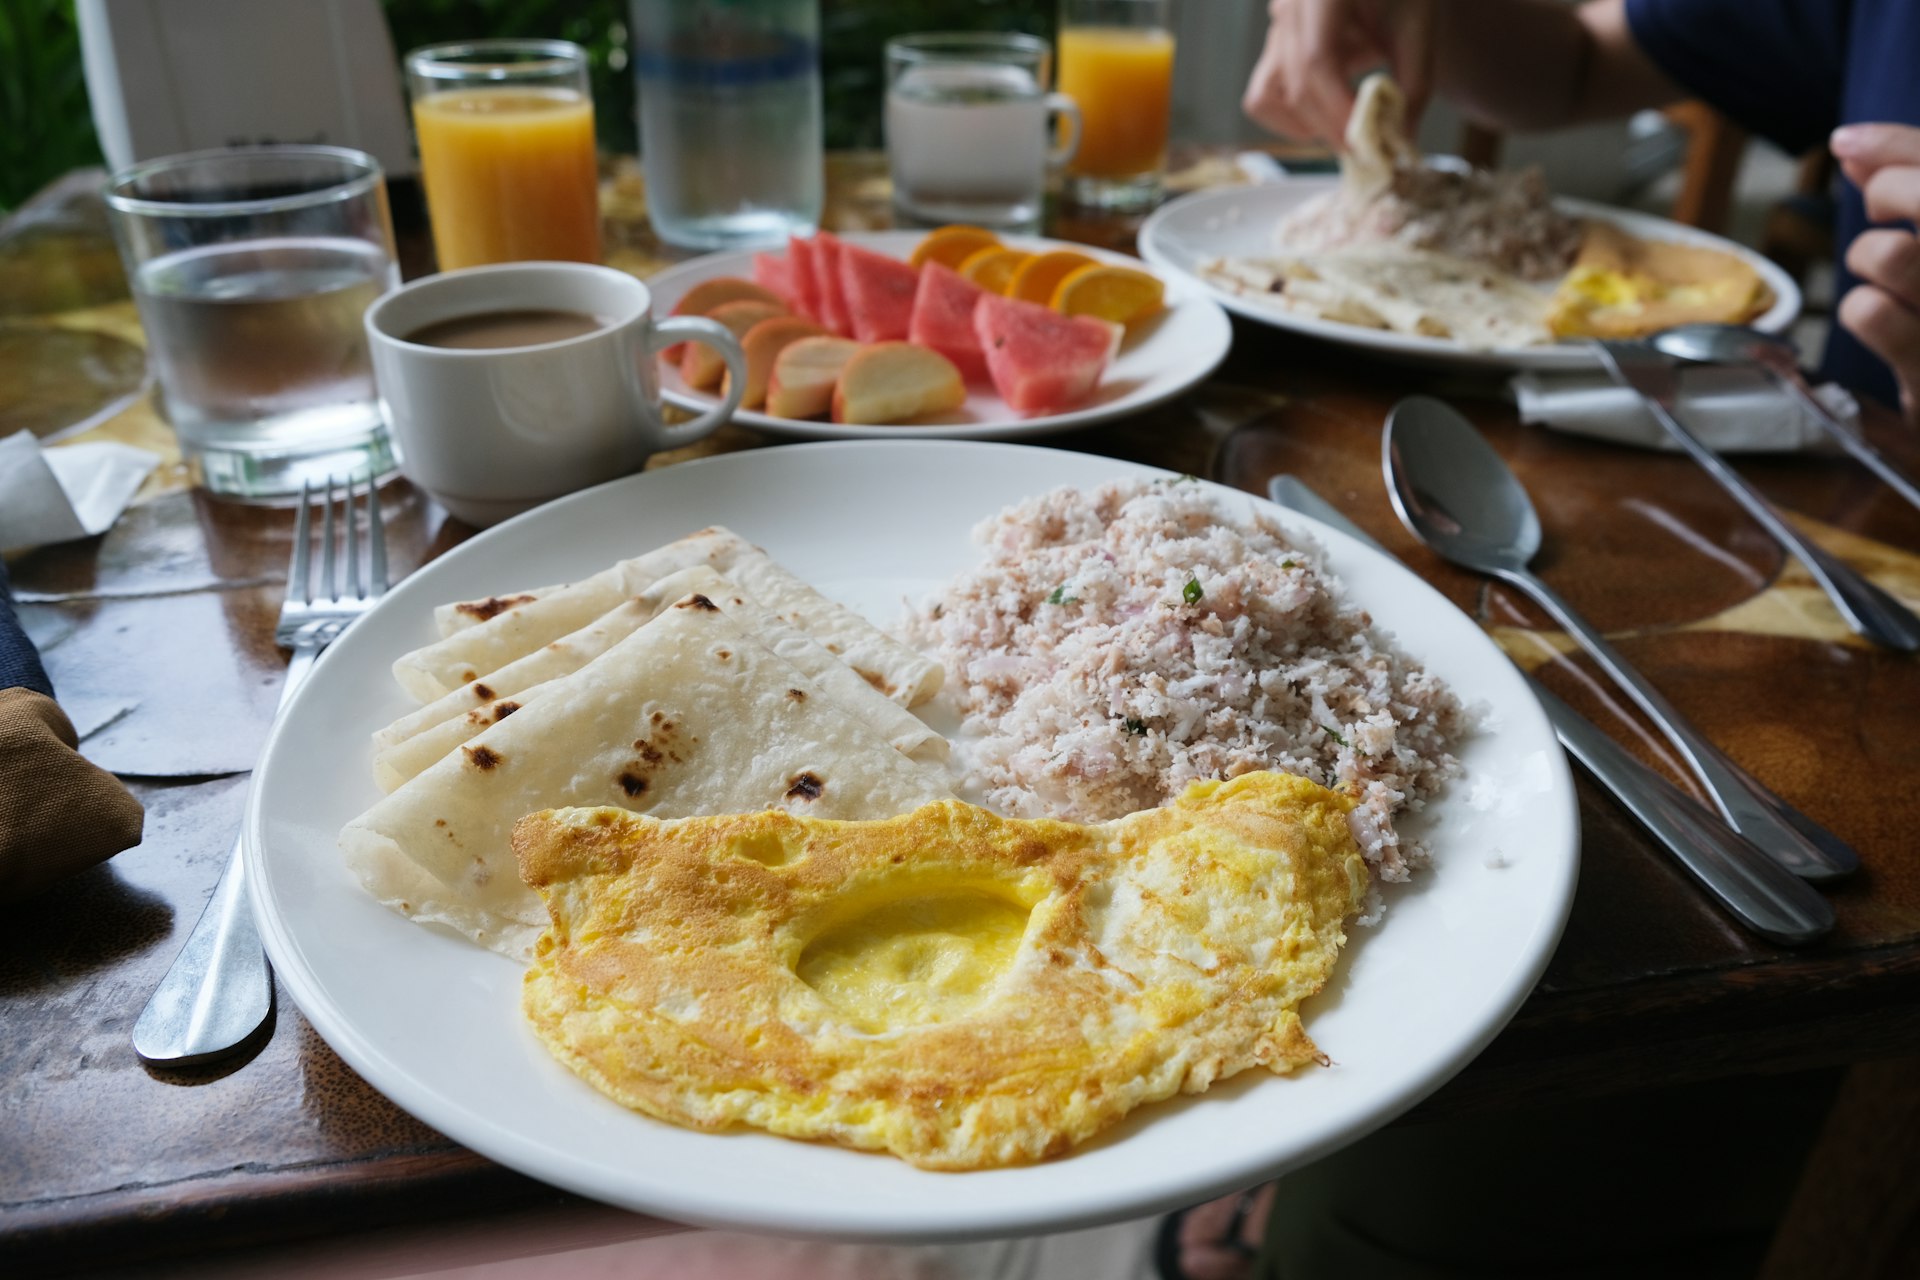 A plate of food being served in a restaurant in the Maldives which includes an omelet and rice